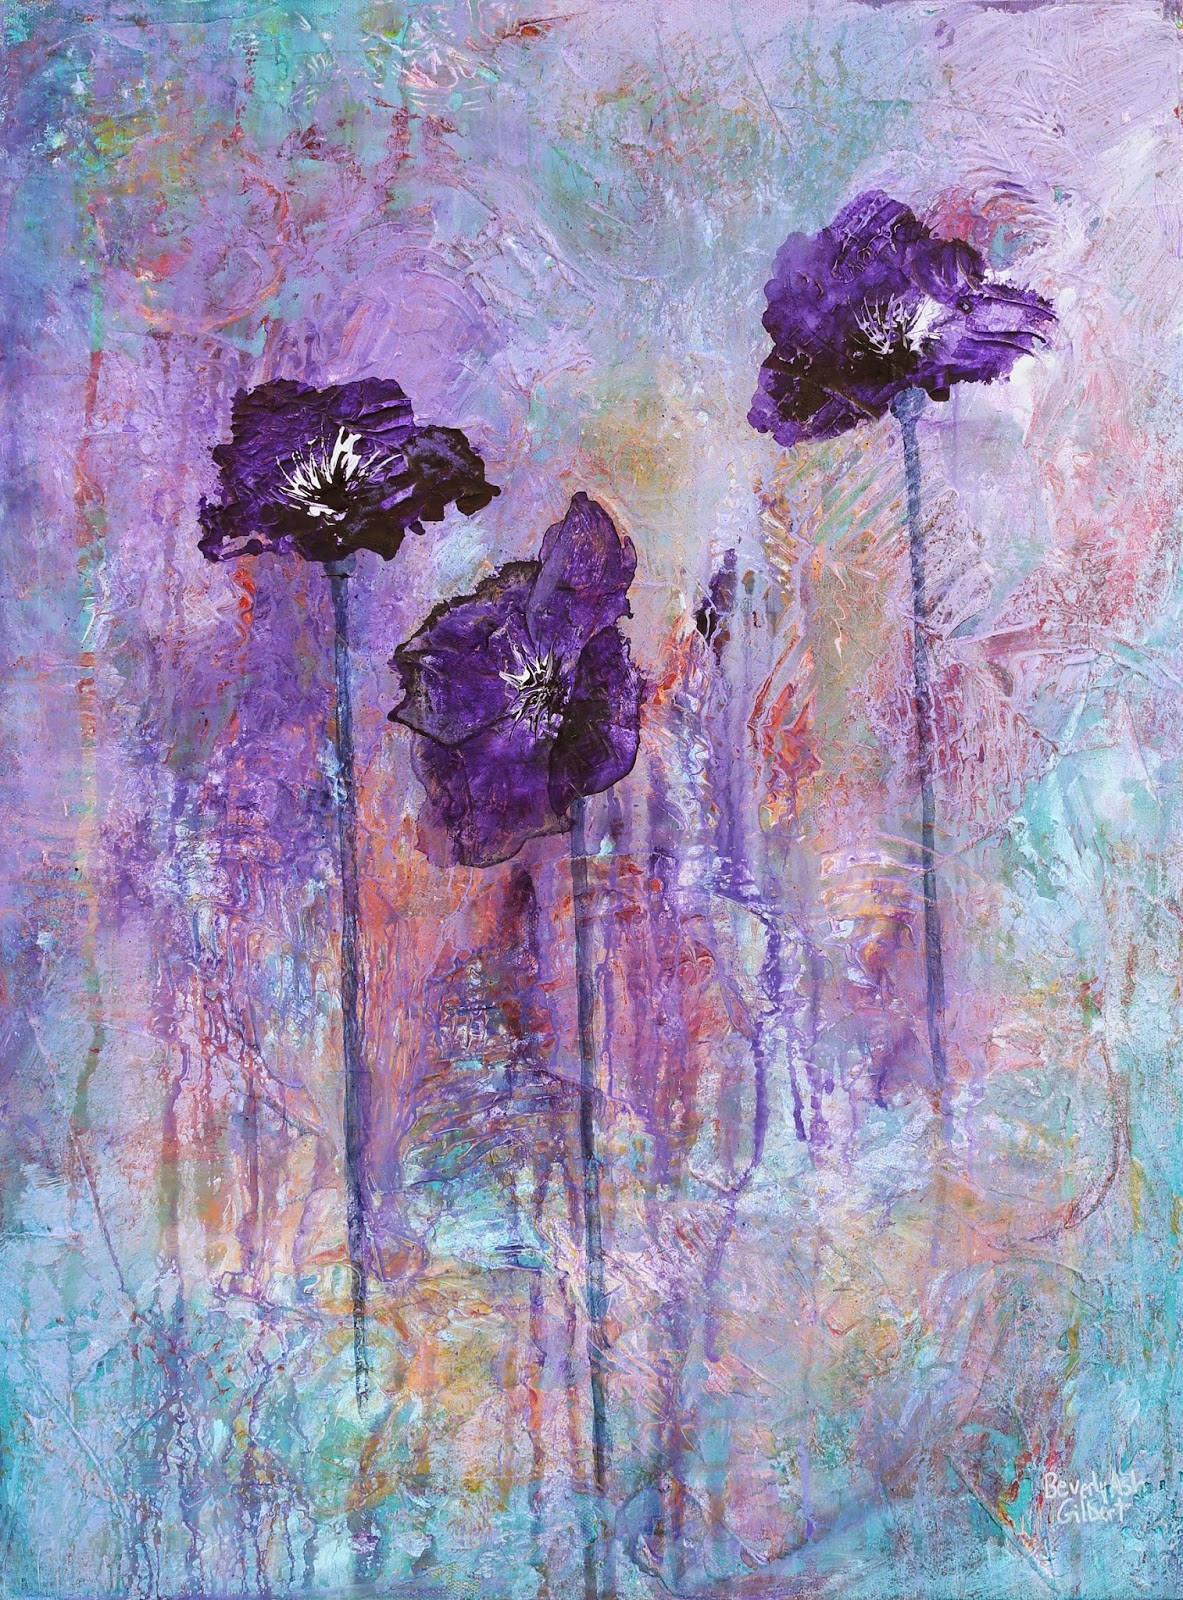 Beverly Ash Gilbert: More Poppies